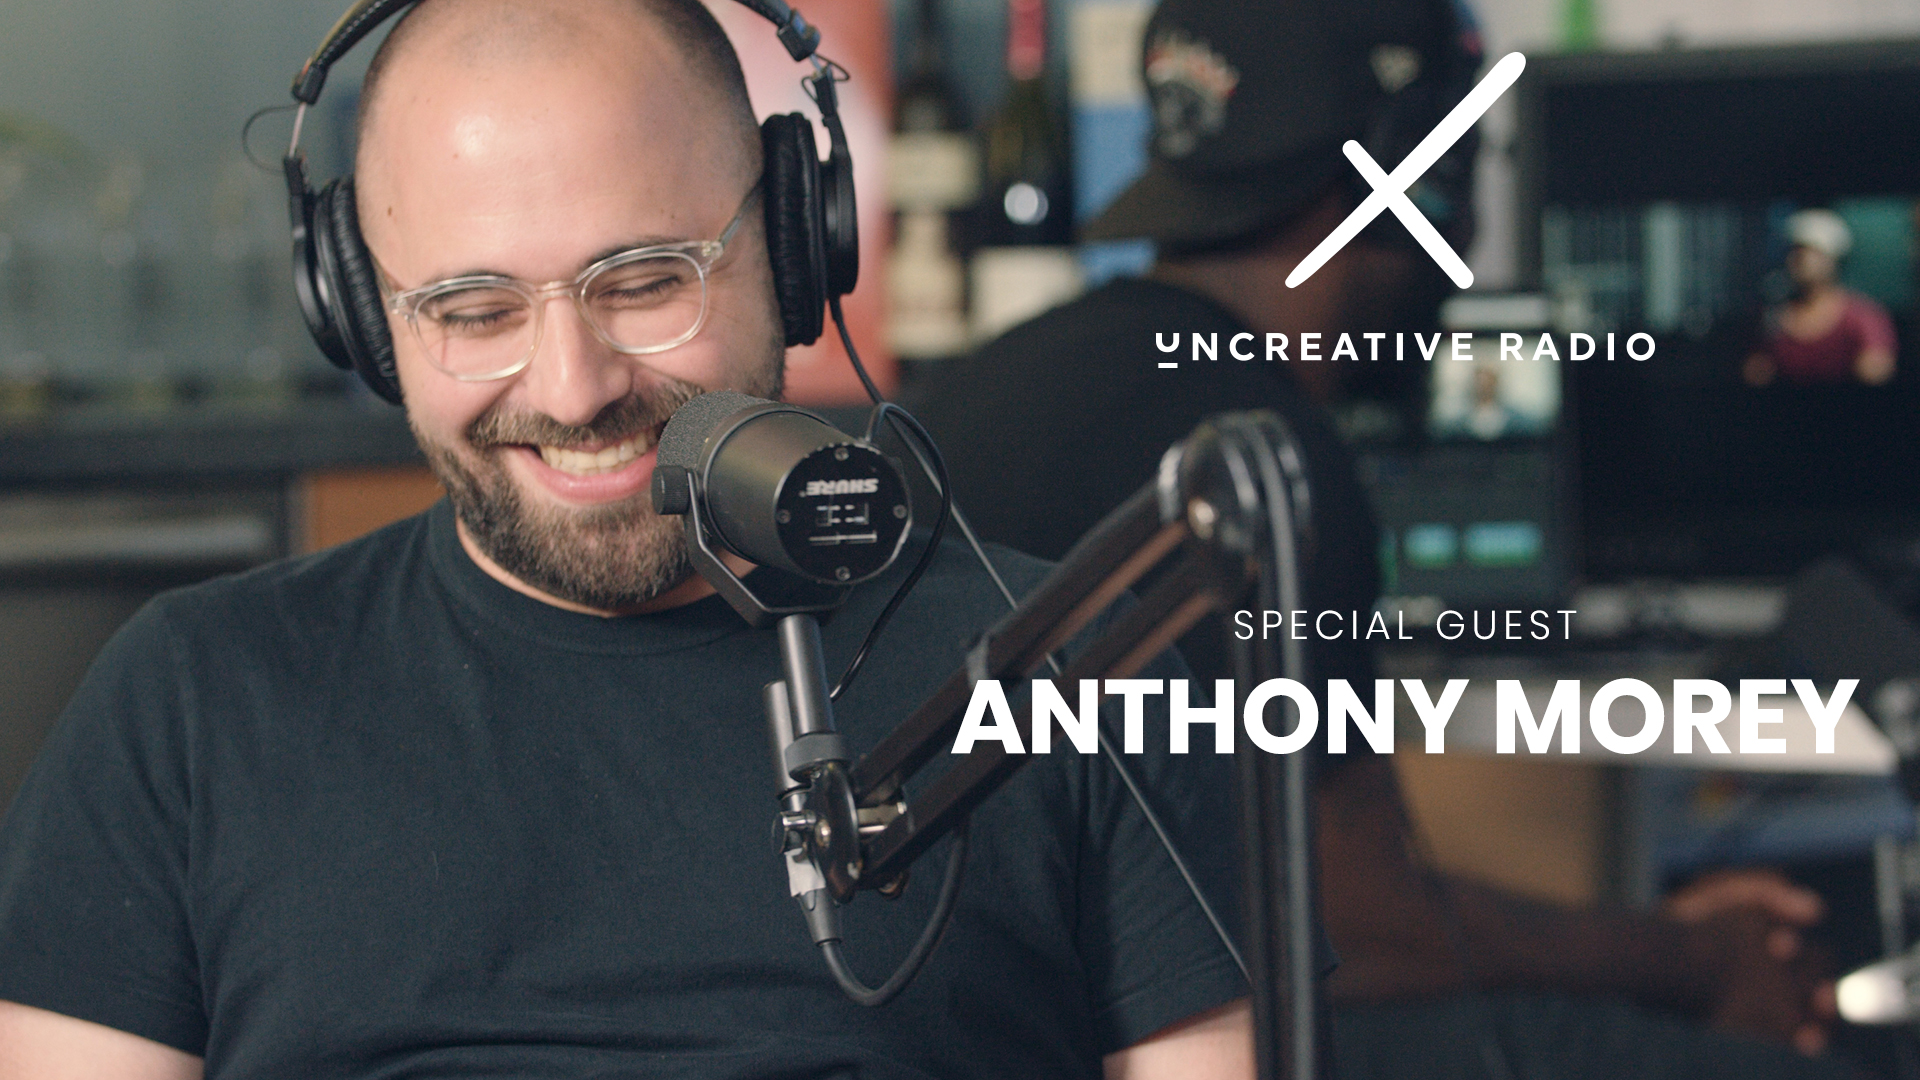 Uncreative Radio with Anthony Morey title wearing headphones and smiling.